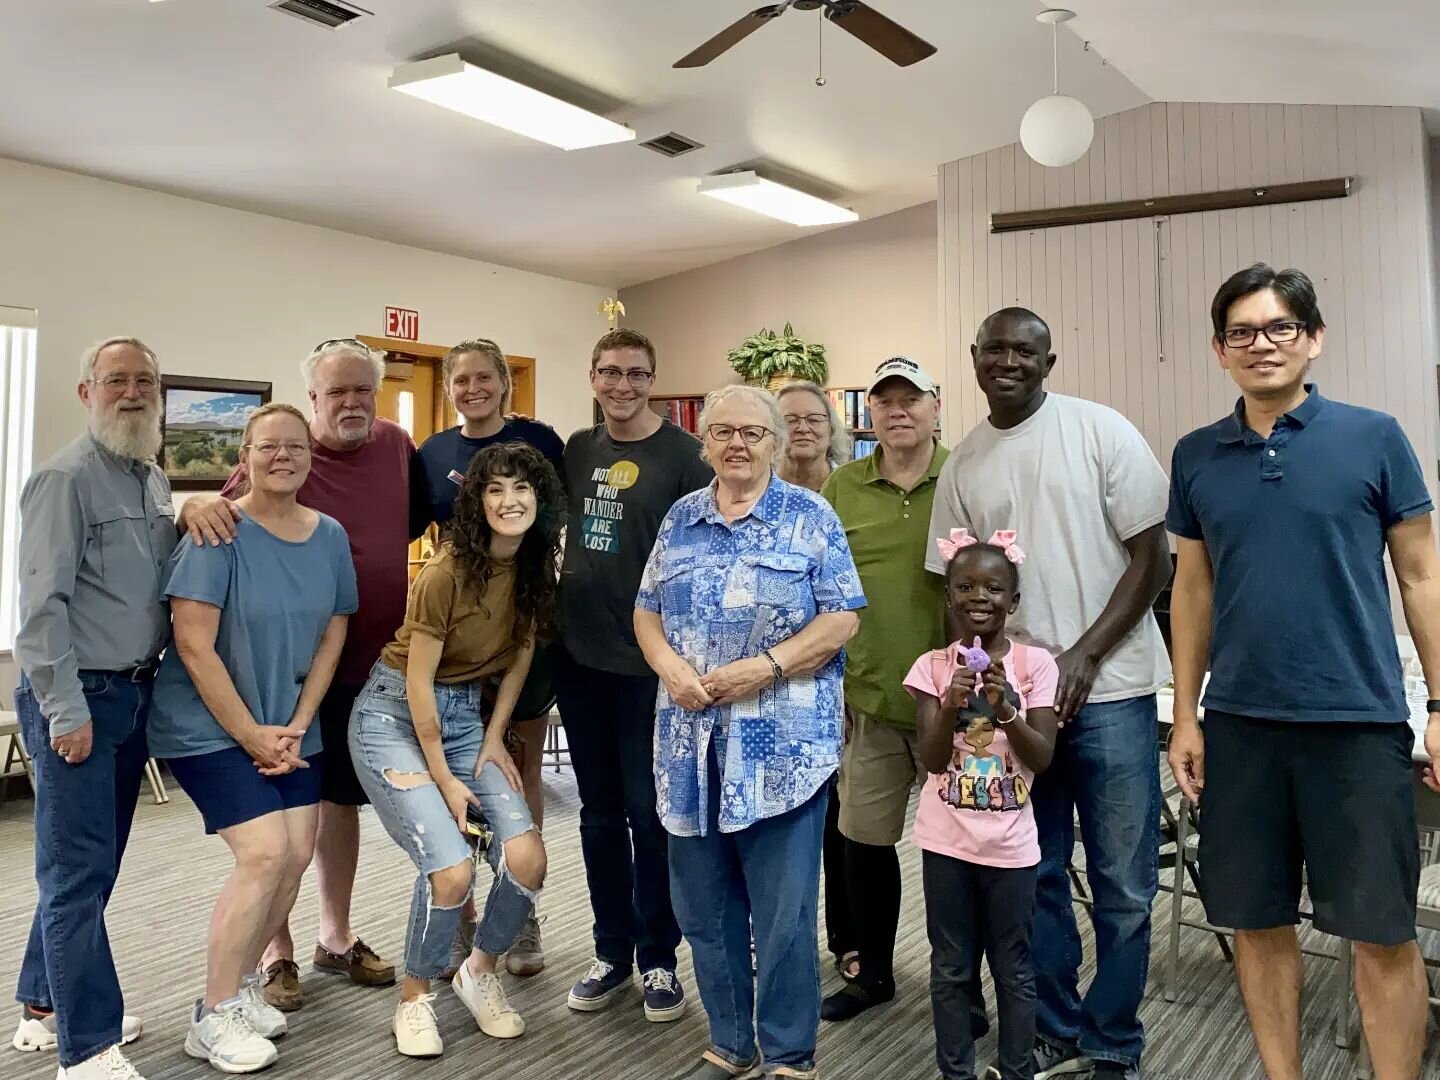 💒 Serving Together ✝️
//
This summer we've had the opportunity to partner with St. Paul's for weekend clean up parties! We are incredibly grateful for their hospitality in sharing the church building, it's been great to give back to this group. Not 